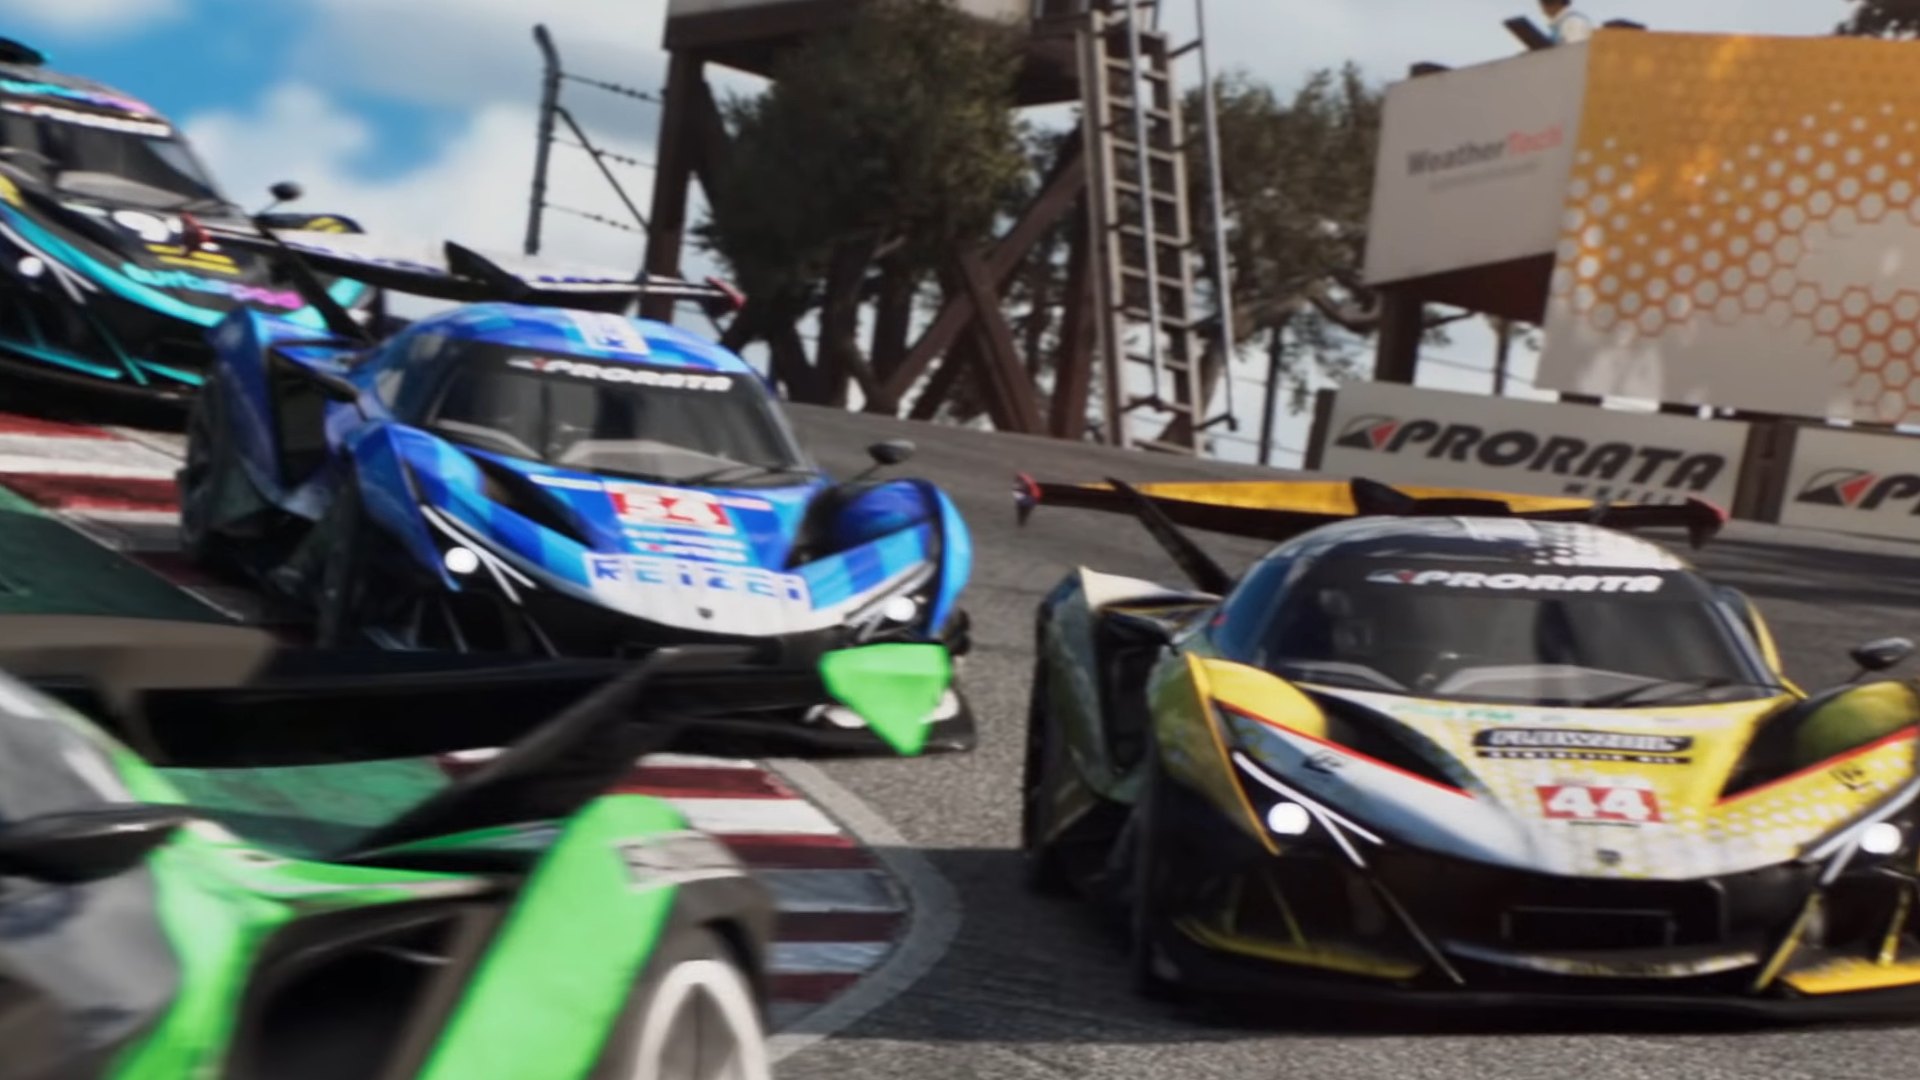 Forza Motorsport Release Date - Trailer, Gameplay & Story